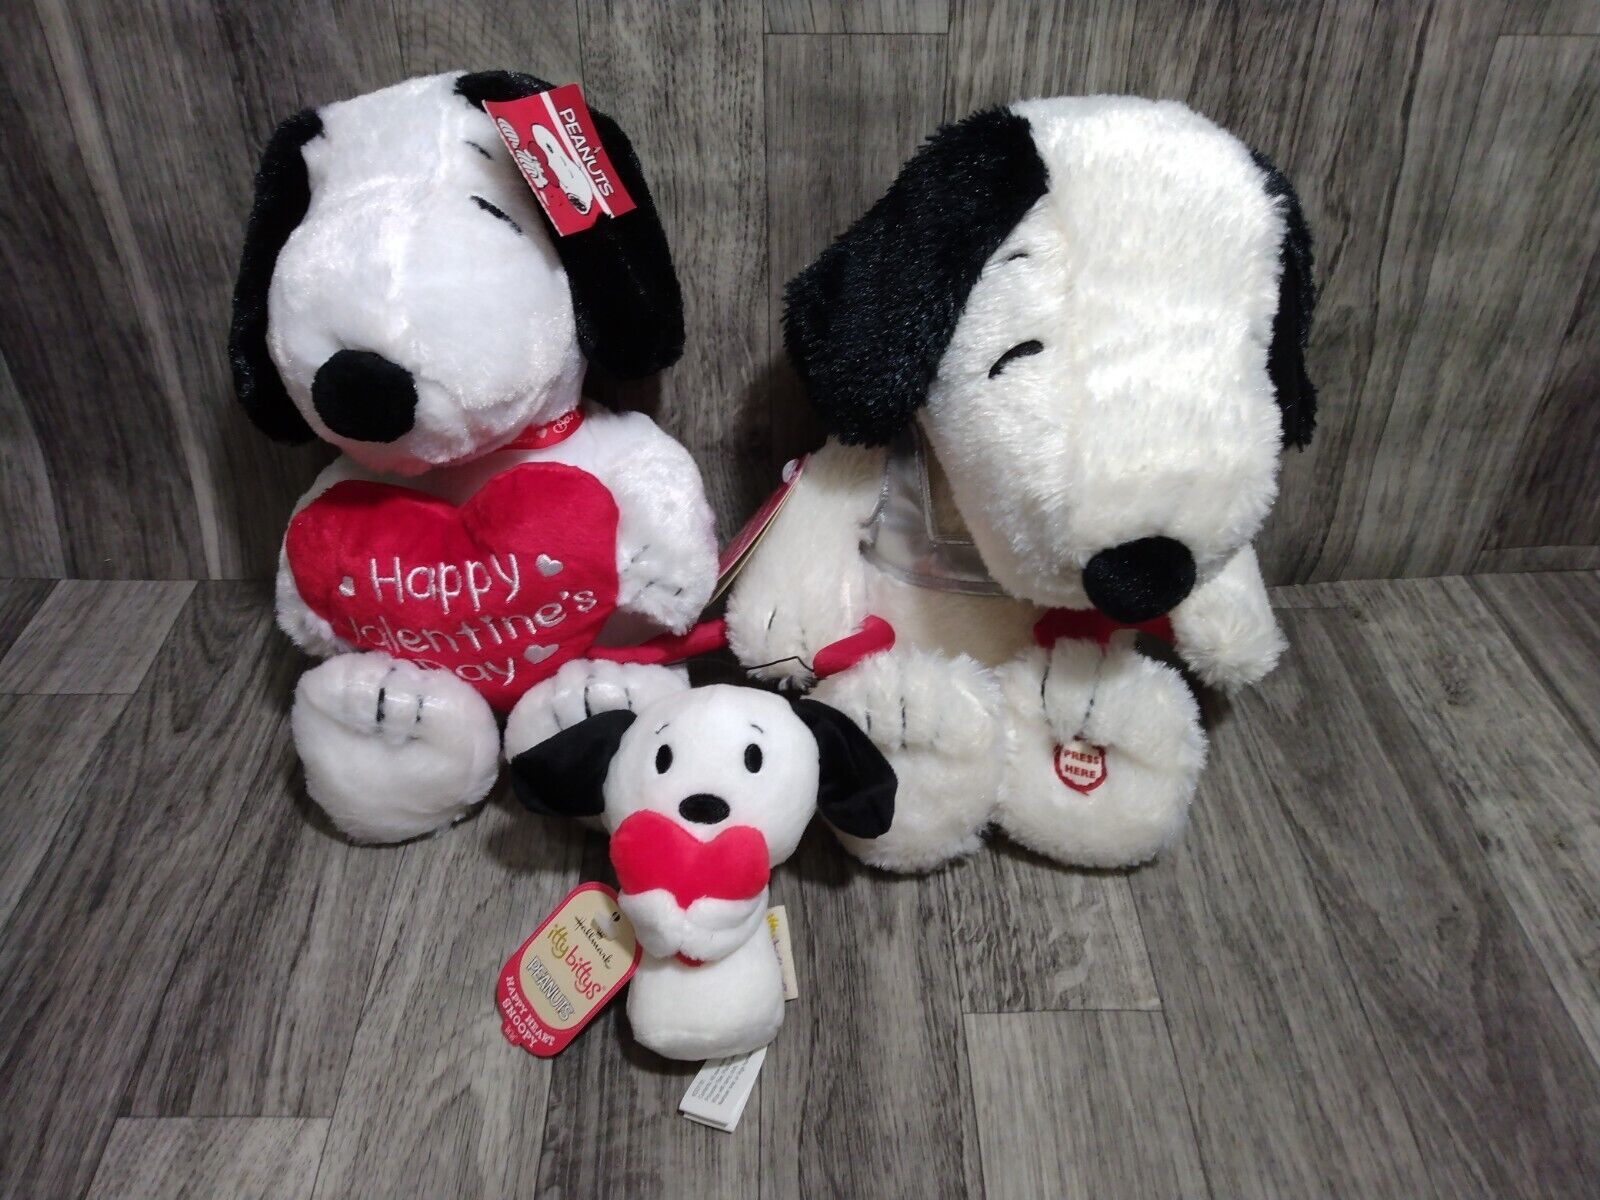 Lot 3 Snoopy plush cupid Snoopy, happy Valentine\'s day and itty bittys peanuts n